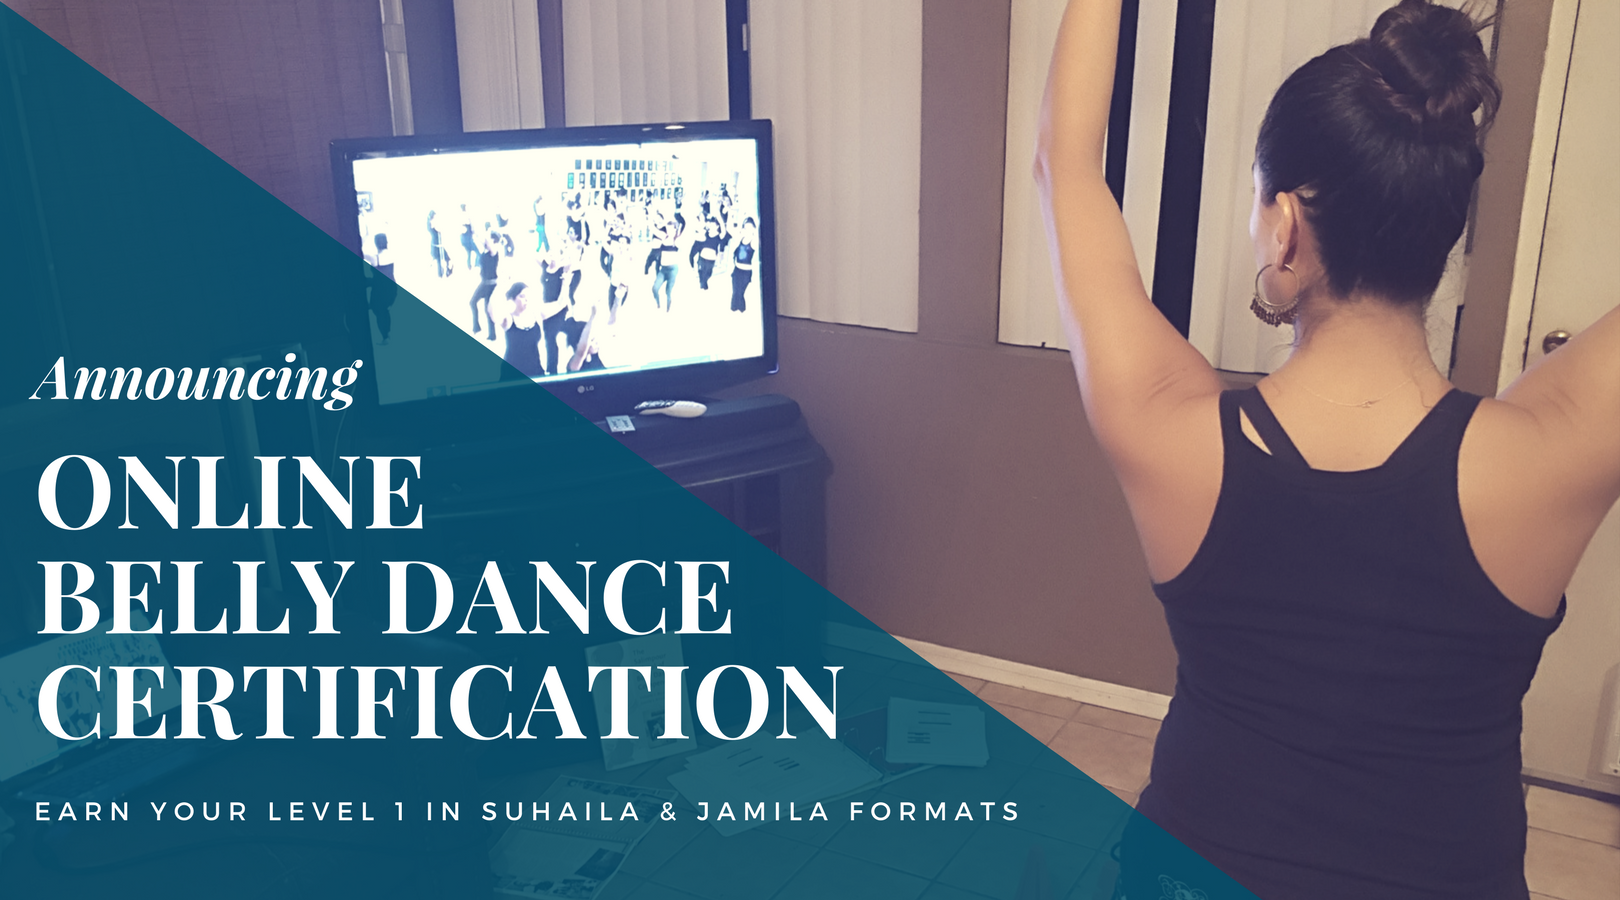 Online Belly Dance Certification at the Salimpour School of Dance